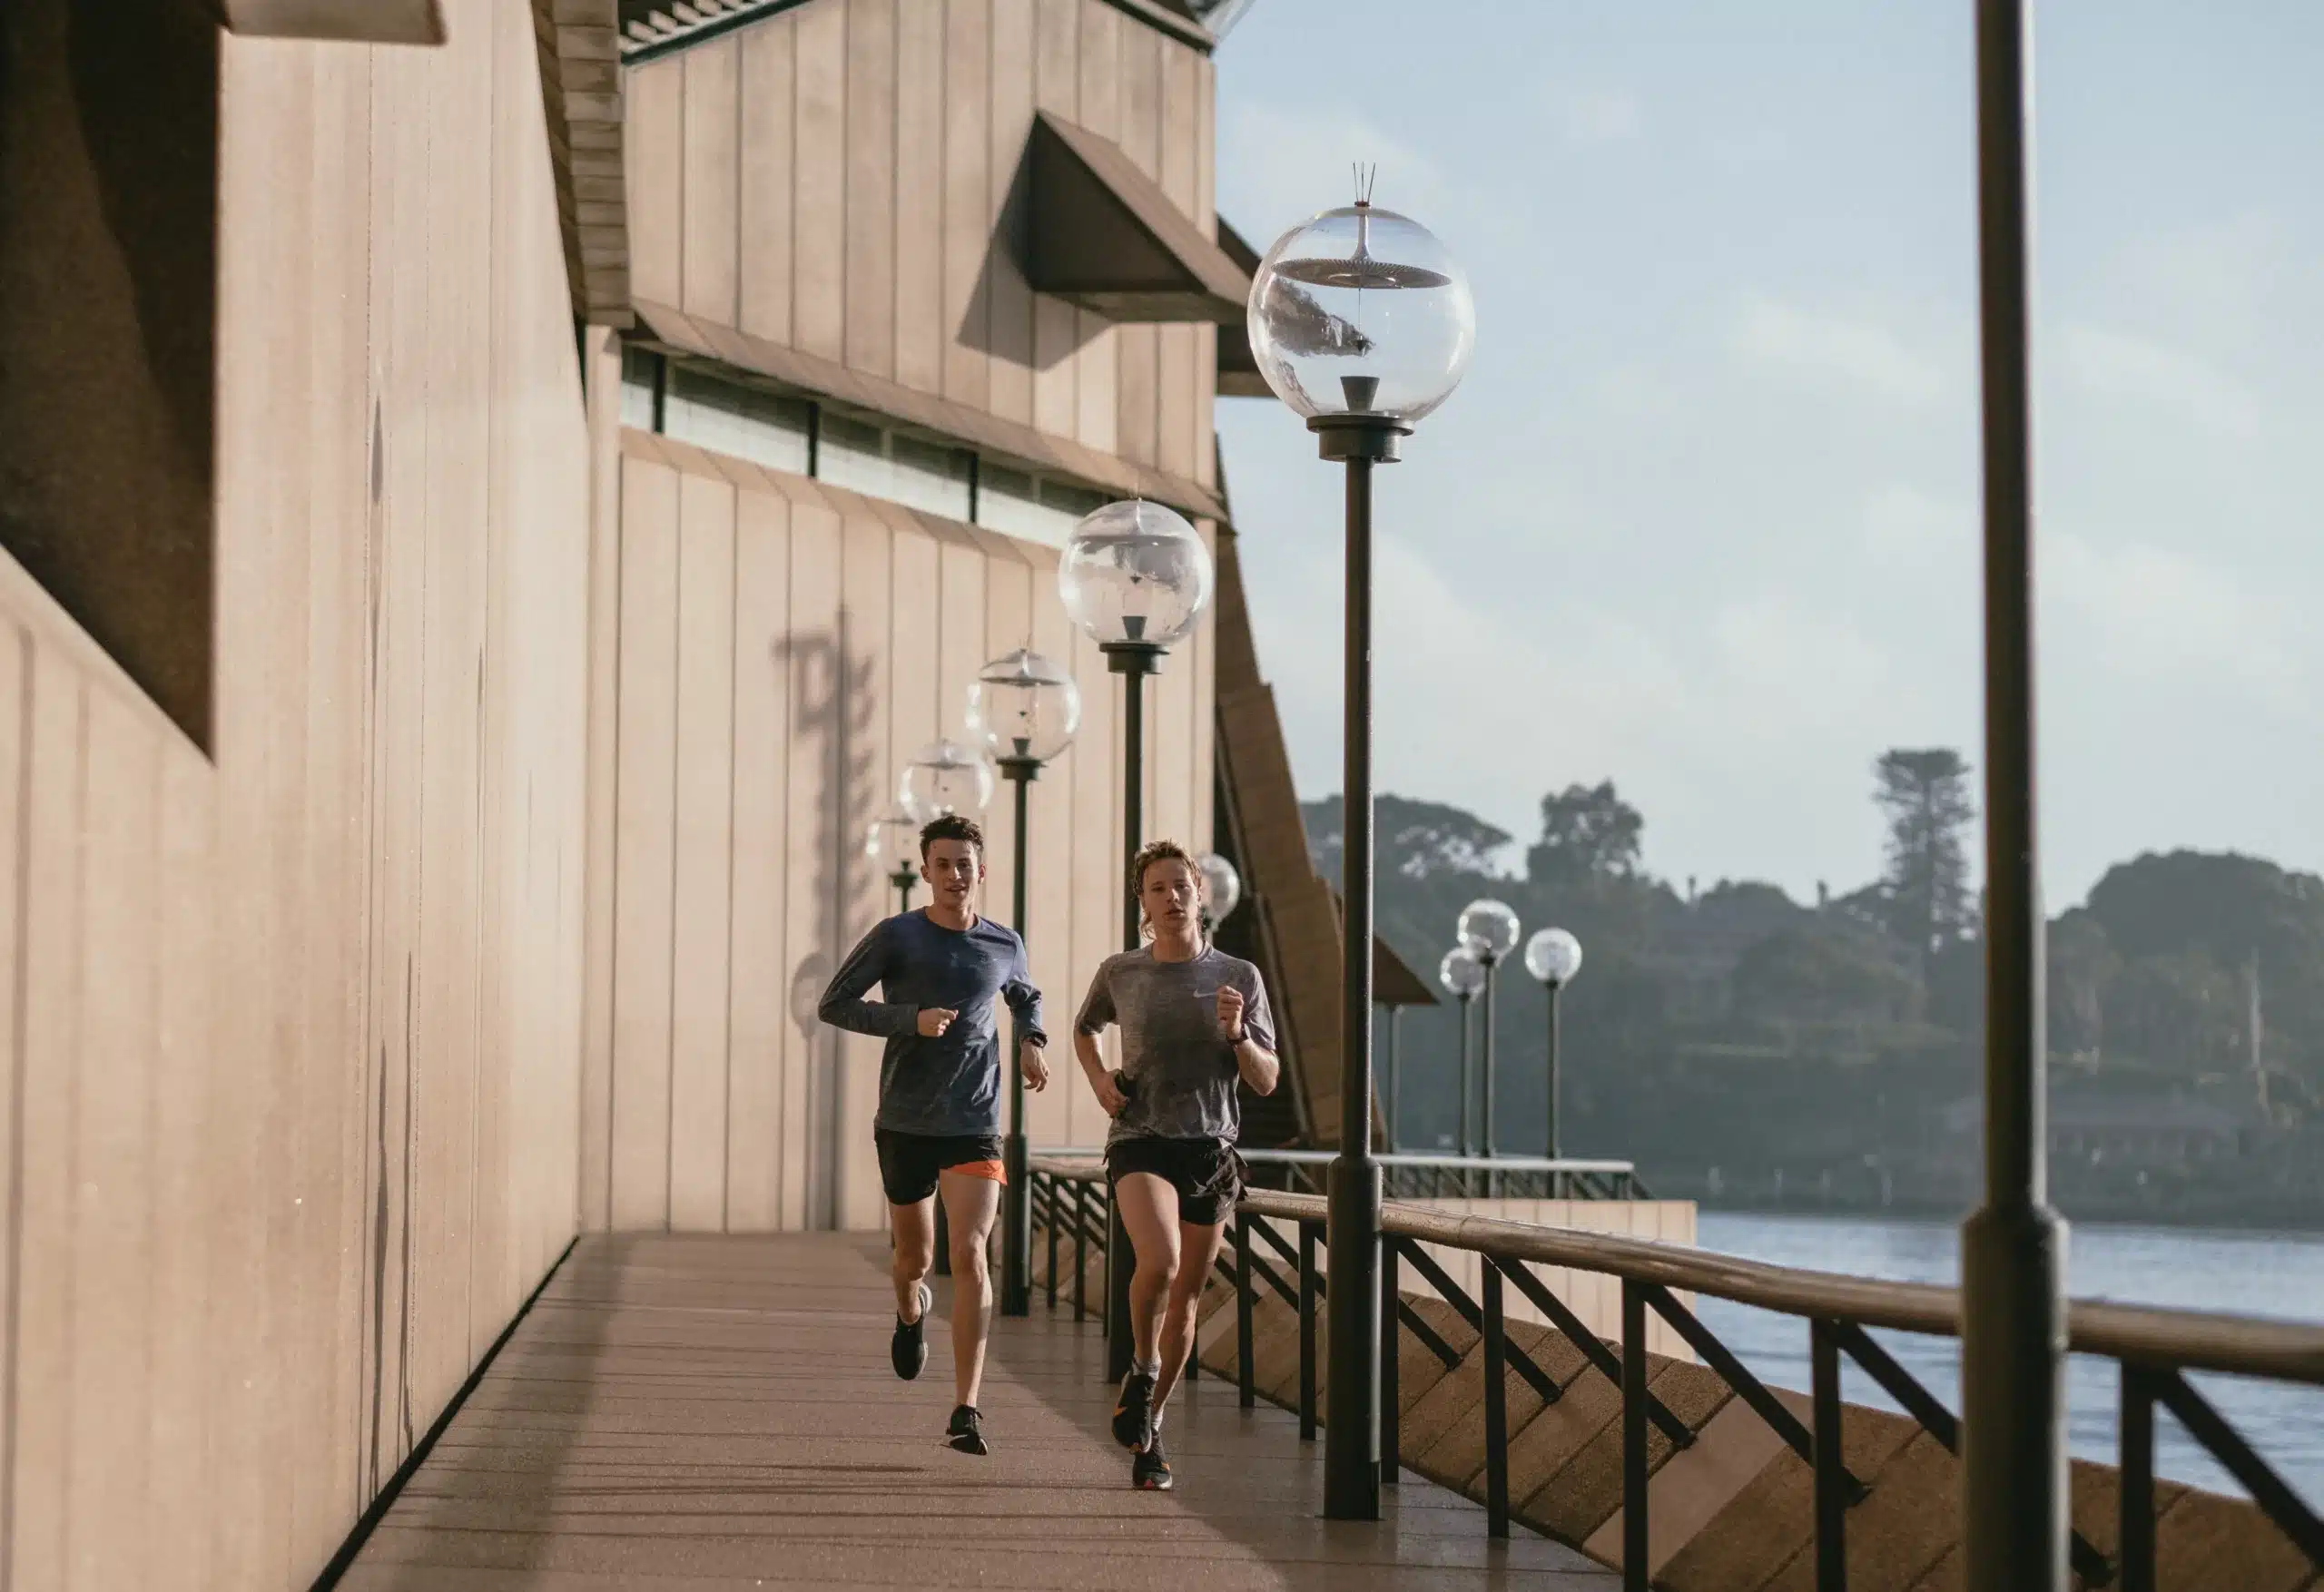 Two males running outdoors along a promenade near water